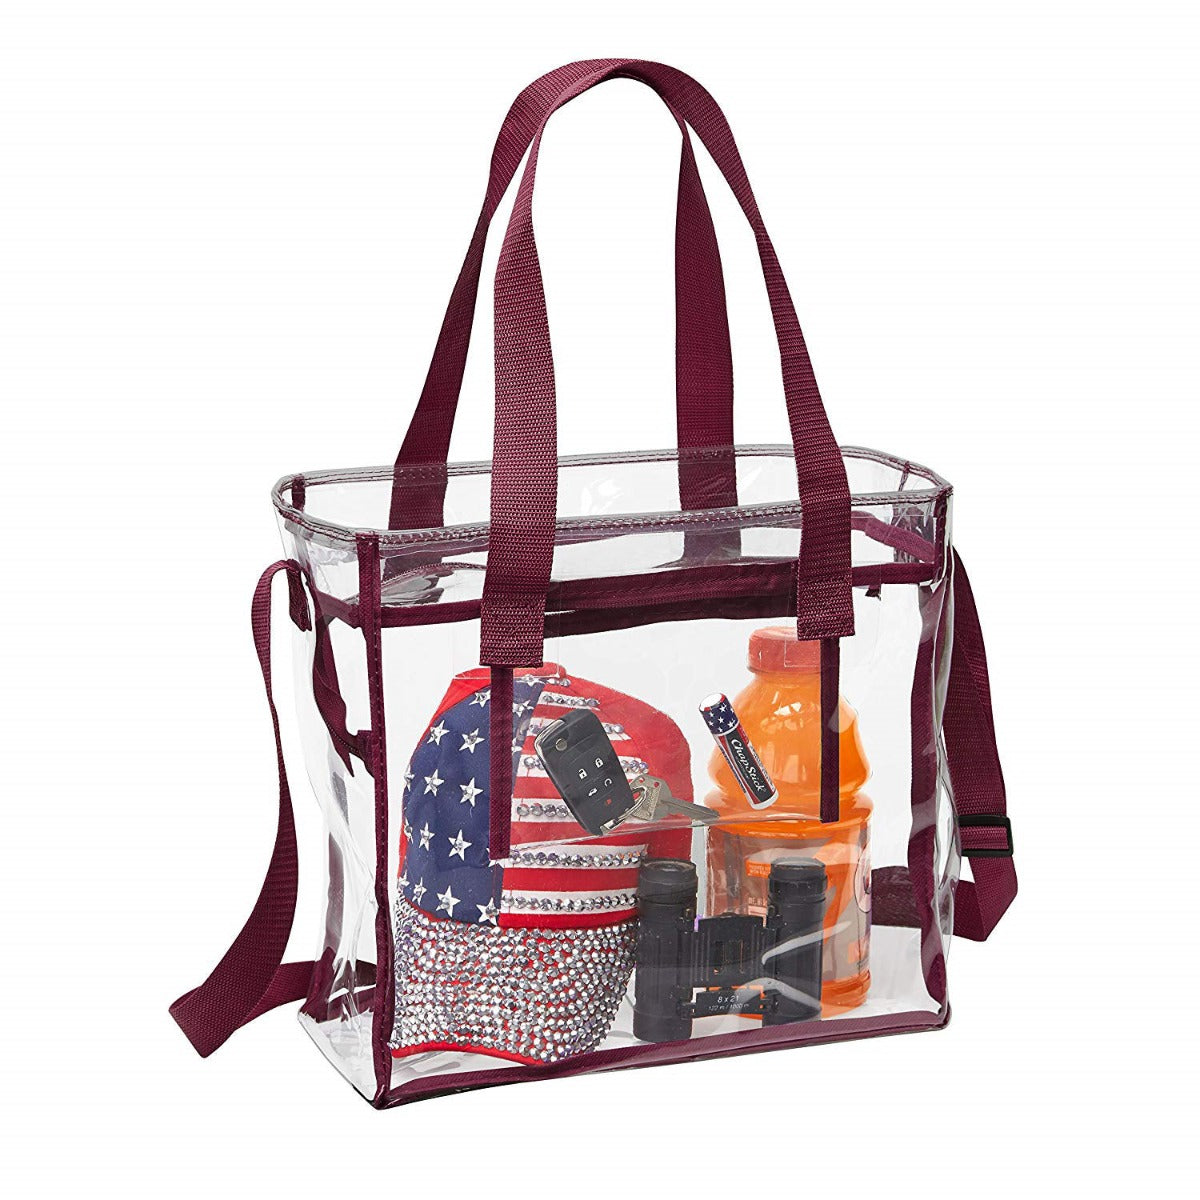 Clear 12 x 12 x 6 Stadium Tote Bag with Side Pocket and 35 Shoulder Straps